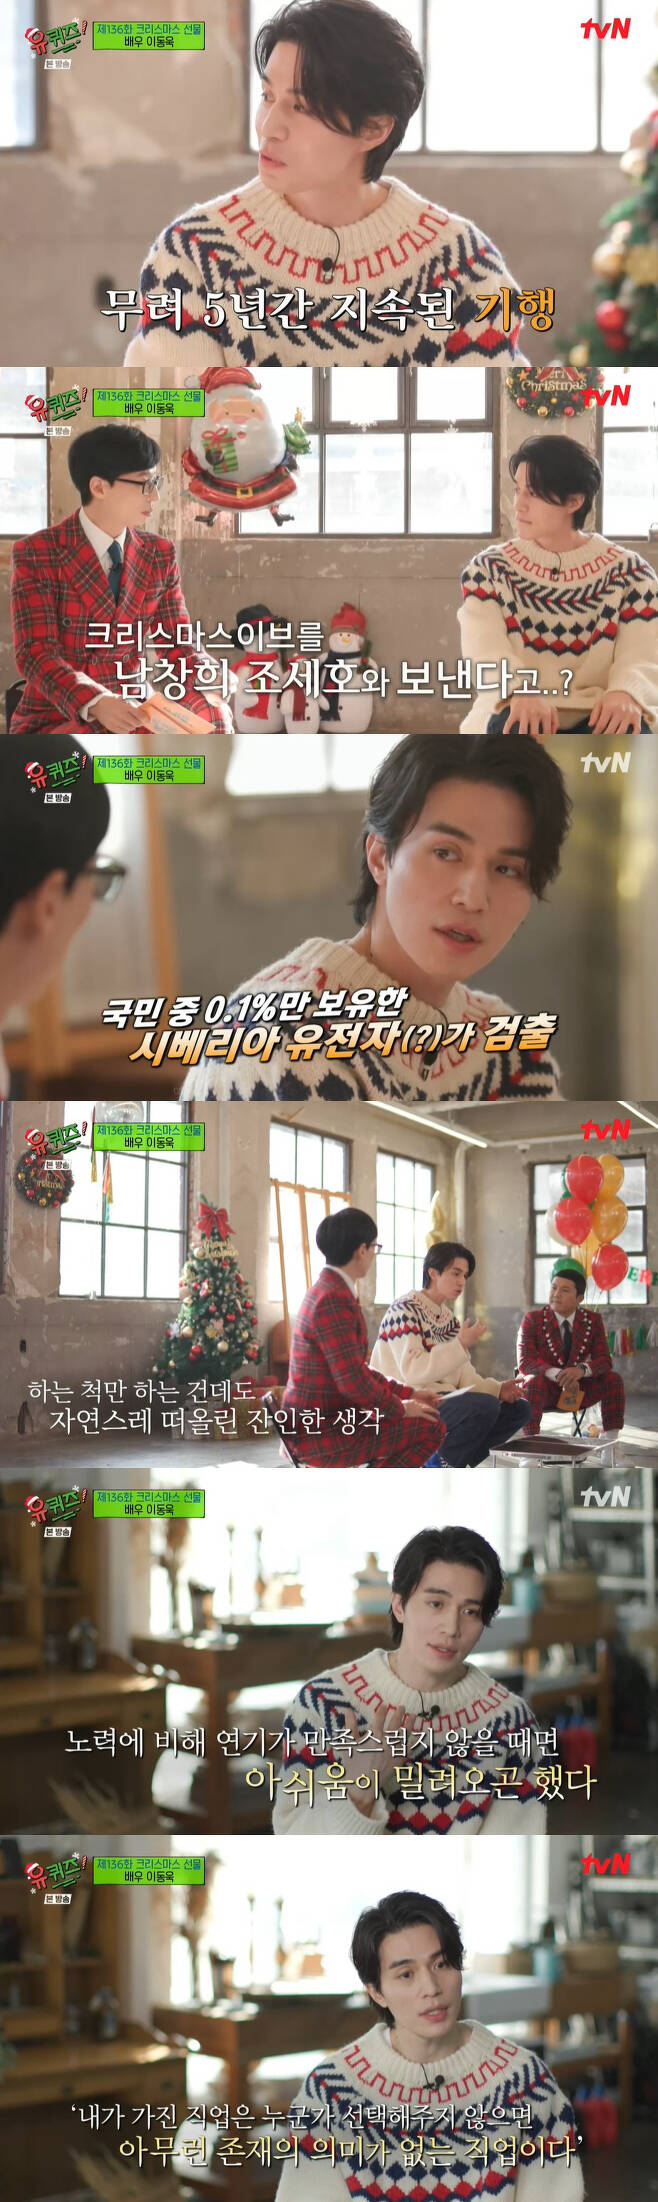 Six years spent with Jo Se-ho...Guardian: The Lonely and Great God after slums (You Quiz on the Block)You Quiz on the Block Actor Lee Dong-wook boasted a candid and furry gesture.Lee Dong-wook appeared on the TVN entertainment program You Quiz on the Block broadcast on the 22nd.Lee Dong-wook said he is busy with TVN drama Bad and Crazy following the release of the movie Happy New Year.Yoo Jae-Suk laughed, saying, I heard that this Christmas is spent with Nam Chang Hee and Jo Se-ho.Lee Dong-wook said: I think its been five or six years since I spent it that way: meet me for dinner and have a drink and its over; go home and sleep at one or two in the morning.Lee Dong-wook recalled the TVN Guardian: The Lonely and Great God Acting, saying: There were a lot of scenes to cry.The hardest thing was the scene of tears as soon as I saw the pavilion with the love of the past.OCN Ellen Burstyn Is Hell story also followedLee Dong-wook said, When I shot a torture scene, I was worried about how to pick it up without knowing it.I was pretending to do it, but I was doing it. I wanted to be careful. Guardian: The Lonely and Great God also reveals that slums have come, Lee Dong-wook said, It was Feelings with hands and feet tied up.If Acting was not satisfied with the effort, I felt sorry. I thought, You are a lot of failures. I stayed at home for months.Nothing was solved if you stayed still. I thought I should hit you naked, and I thought, Ellen Burstyn is hell.I was Acting with Feelings of Flying and I was more comfortable than before. I have a job that I have to constantly get Choices. Theres not much I can do on my own.My success is not my decision, he said to the fans who always cheered him.The next baby was Yuna Young, head of VMD (Visual Merchant Diger), who is in charge of S department store brand visuals.The appearance of the department store The so-called big hit situation that the Christmas decoration of the department store emerged as a famous spot, he laughed, saying, I told you I would receive a lot of bonuses around.It was YG Entertainment from February. We have to enter YG Entertainment two months after Christmas next year.Weave the story, then visualize and use the music. We report the video to the top and get a confirmation.I map for a month according to the exterior, and I make and install the structure. Everyone has struggled with one accord, and I have come up with good results.The concept is called The Circus and The Circus has made up the images with colorful and colorful images.I thought that many people were hard at Corona 19, but the more difficult the time, the more warmth I needed, so I wanted to give warmth through the video. I thought I wanted to give Christmas presents to the citizens, overwhelmingly because it was a difficult time. I removed the advertisements on the outer wall and filled it with 400,000 light bulbs.Christmas is a special season, so the advertising fee is more than twice as high, so it was not an easy decision. As for the production cost, he said, I have done a lot of recycling, I could use the invisible structure again. He also said that the number of department stores increased during the video.I felt like thank you when I saw the citizens enjoying the video, he said.Choi Young-hyung, who has been driving Santa Bus every Christmas season for 19 years in Cheonan, also appeared. If you do not know me in Cheonan, it is a spy.I have been working as a bus driver for about 26 years. As for the inside of the bus, which was full of Christmas decorations, I bought the decorations as a private and decorated them myself.I have a basket on the door of the car, and it contains candy and lollipops, he said.His bus operation routine was also revealed, and he told passengers, I hope you will be healthier next year and have a day like a gift every day.In addition, he also showed his ability to surpass radio DJs by receiving stories and application songs.The daughter was worried about her health. But she said, I feel so good when I greet my guests.If you feel sick and have a good feeling, I am good. There is nothing else. He said why he runs Santa Bus even in busy situations.Passengers said, It is Feelings who are healed when I take this bus, and I am busy because I do not have a chance to feel the atmosphere at the end of the year.